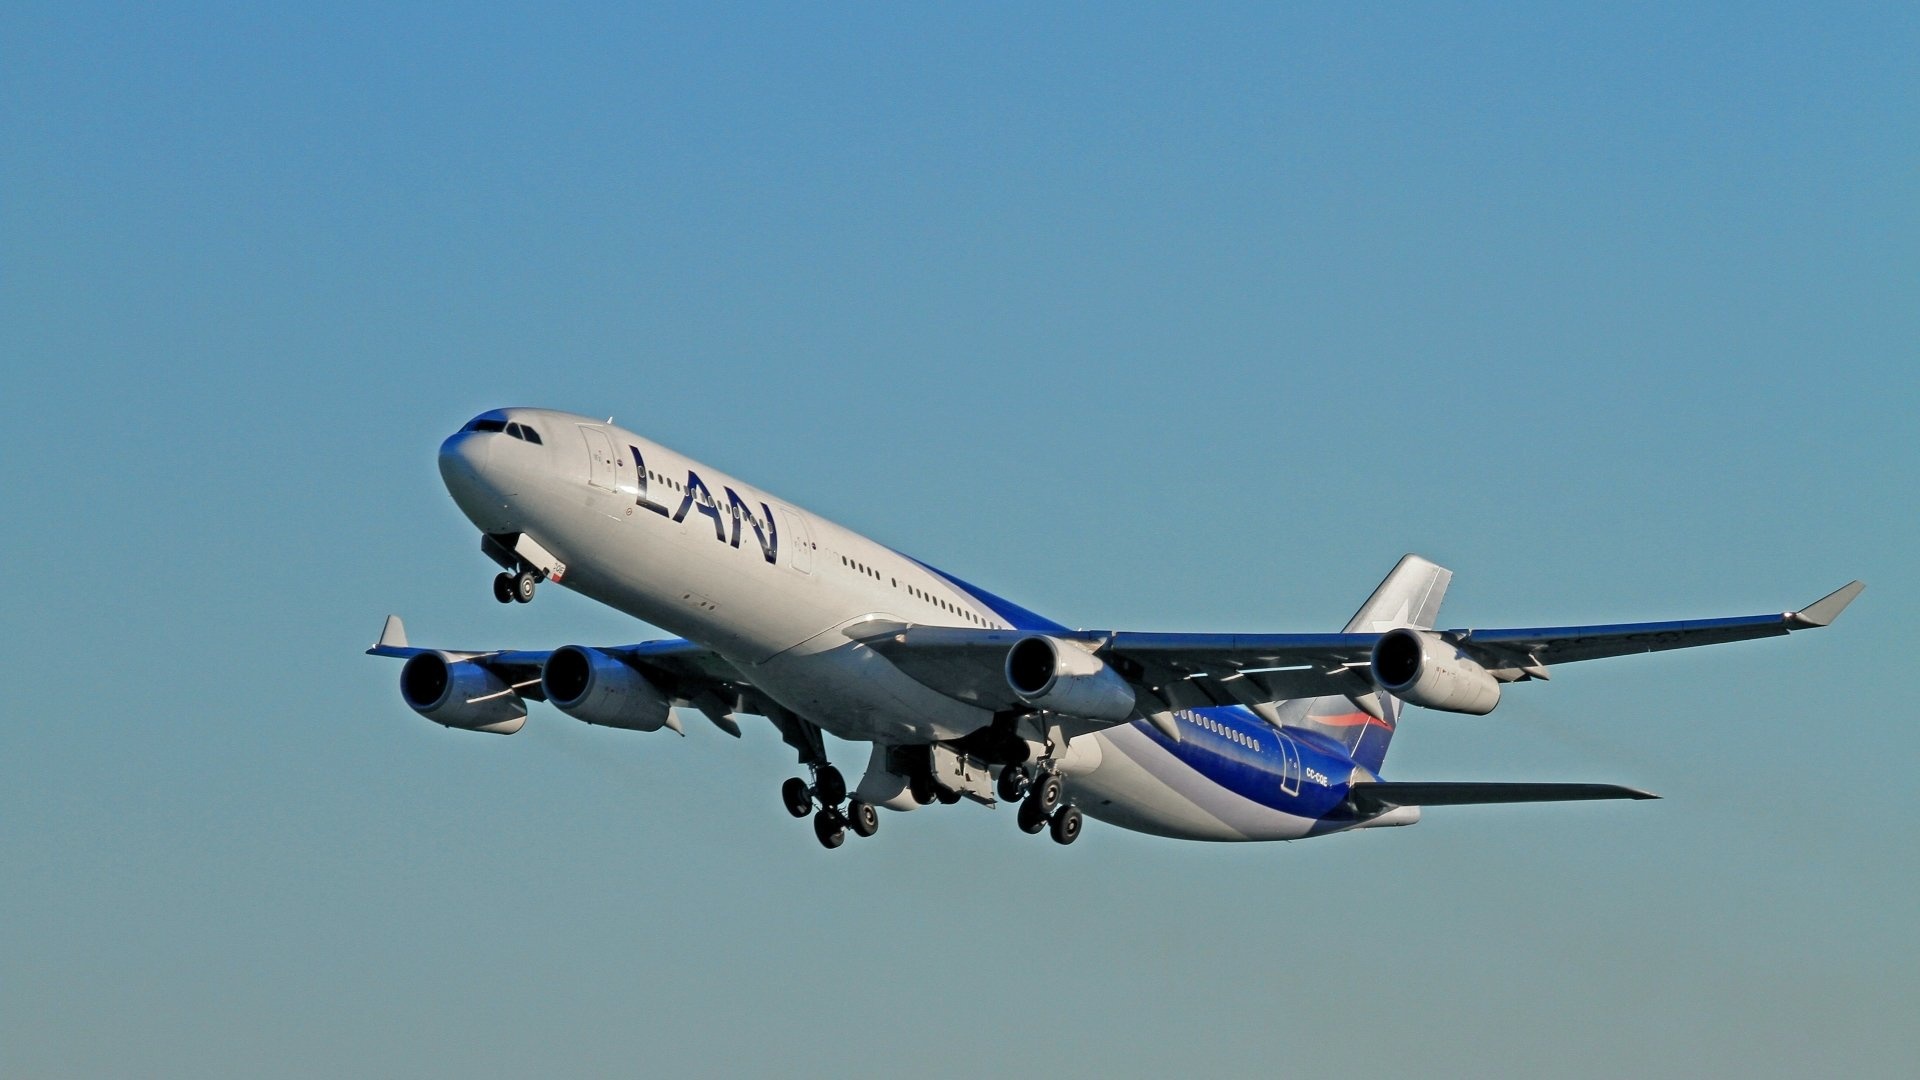 LAN Airlines, Aircrafts HD wallpapers, Background images, 1920x1080 Full HD Desktop